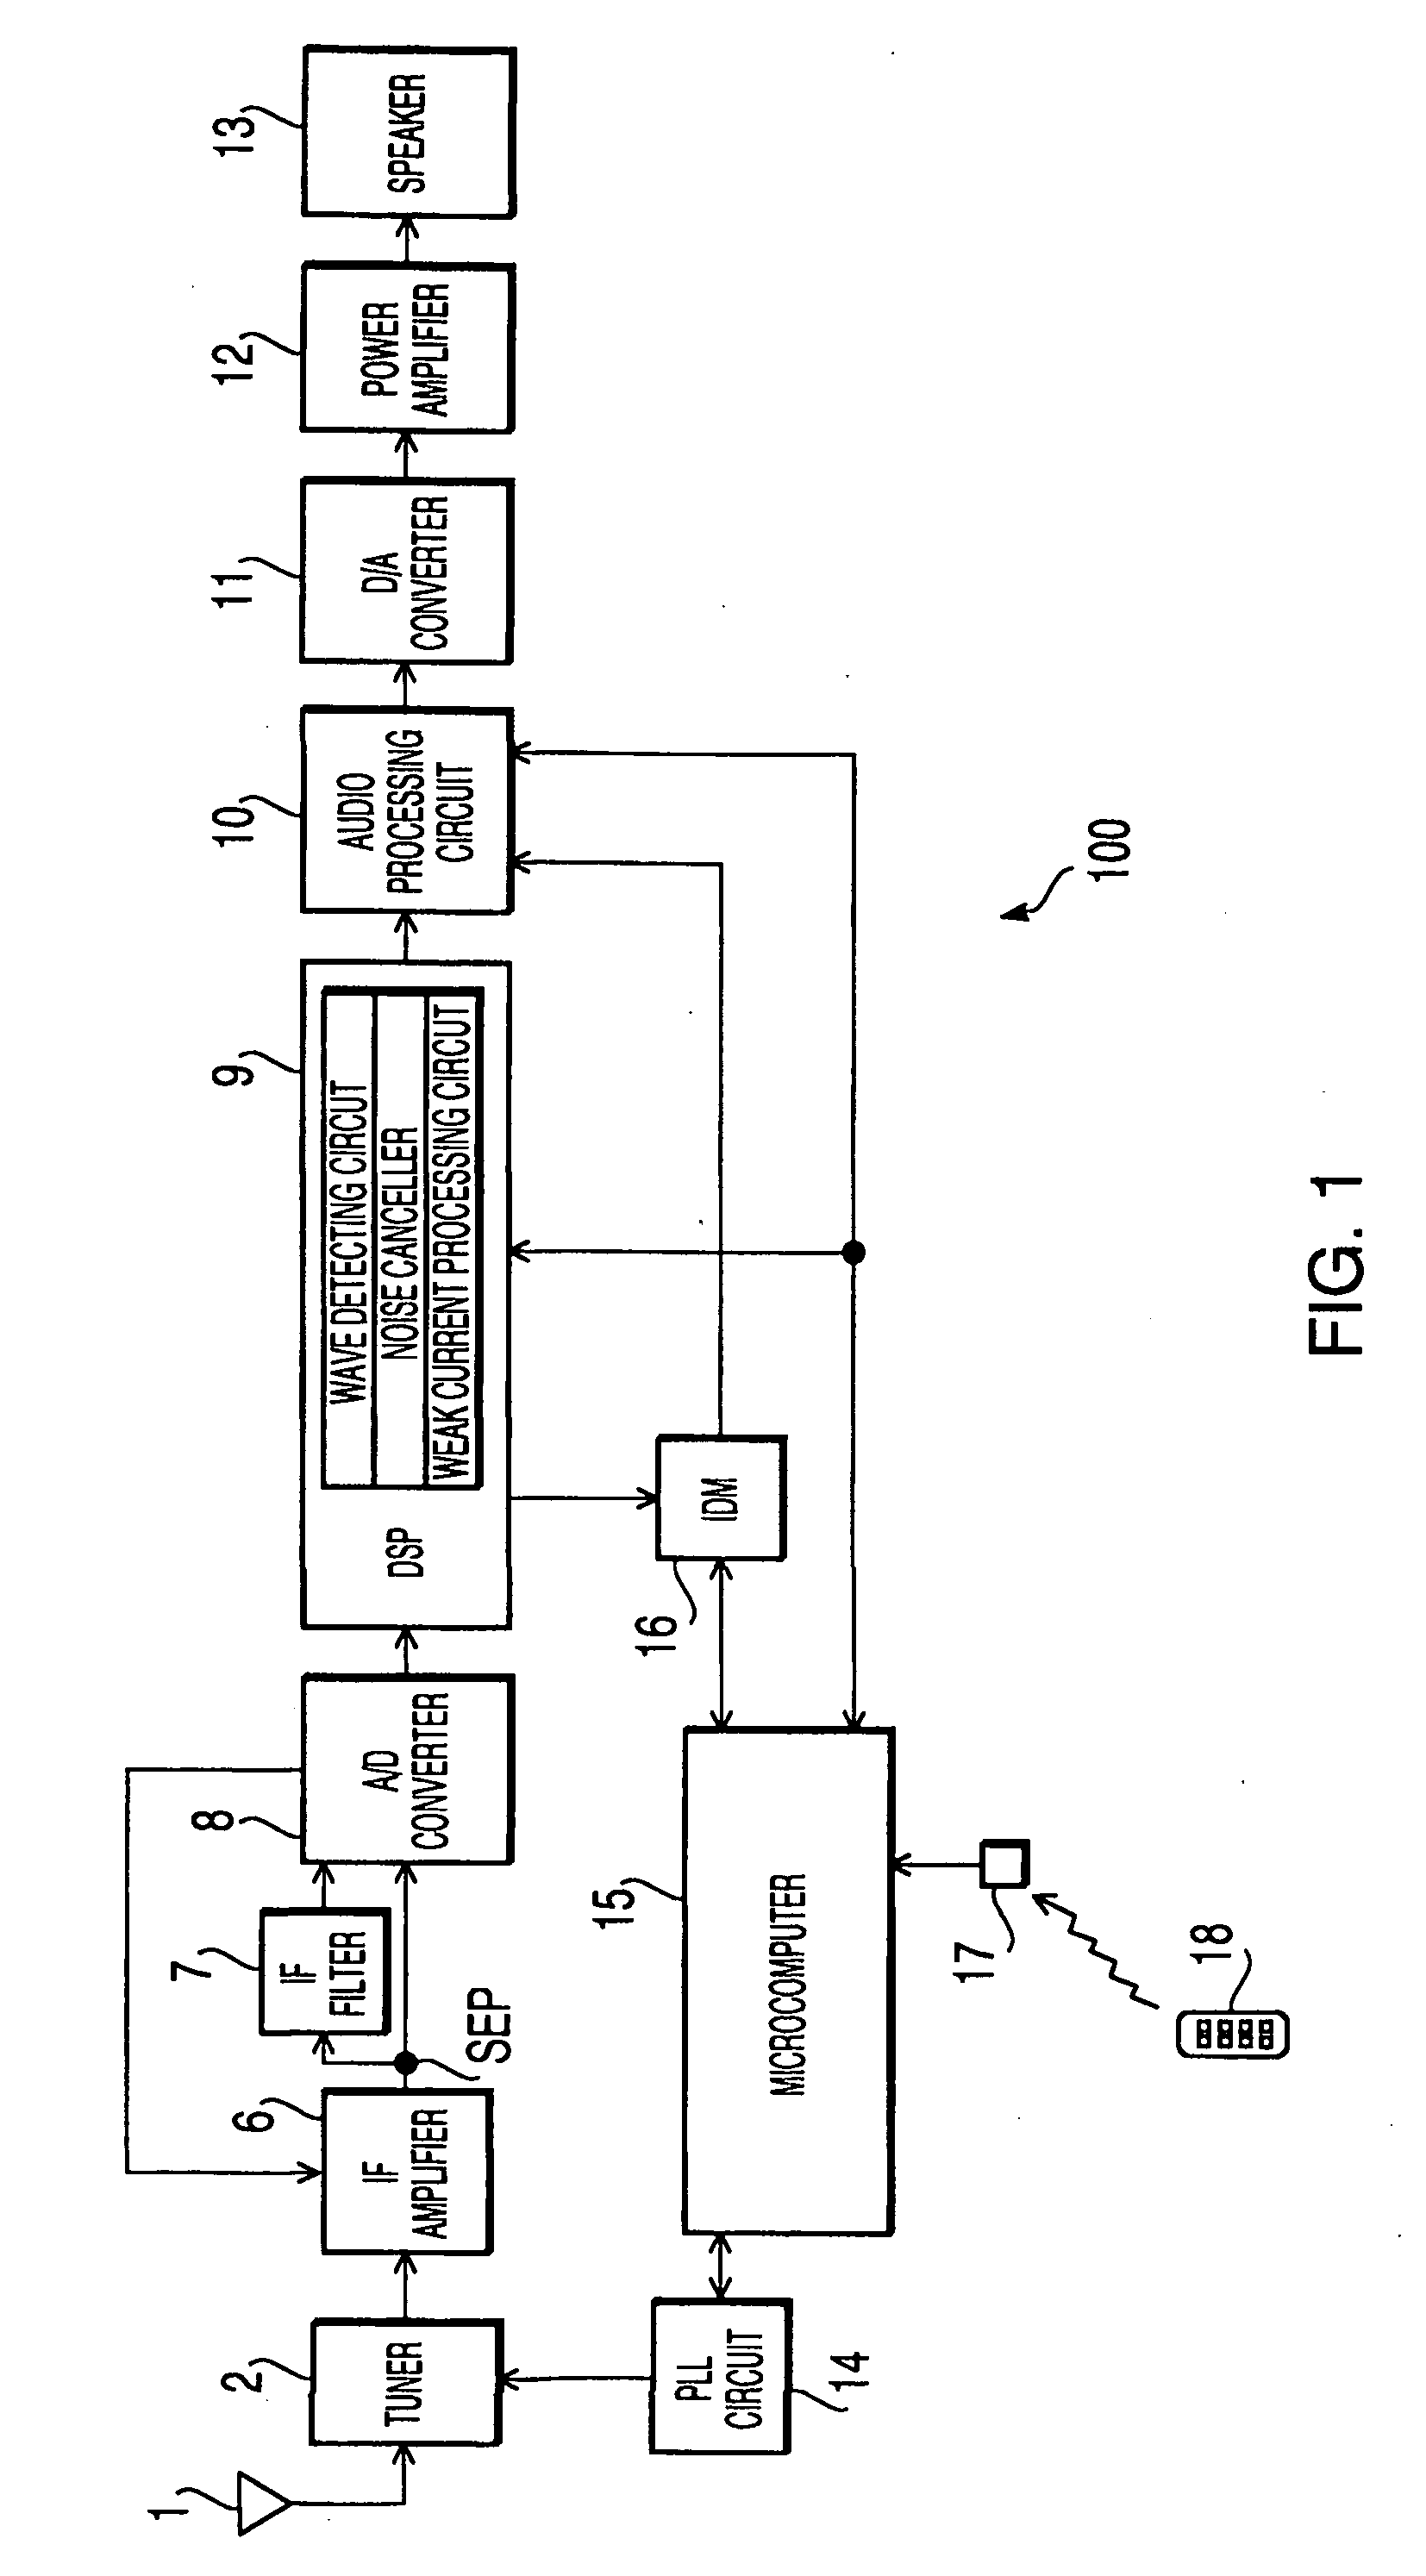 Broadcast receiver and broadcast channel seek method